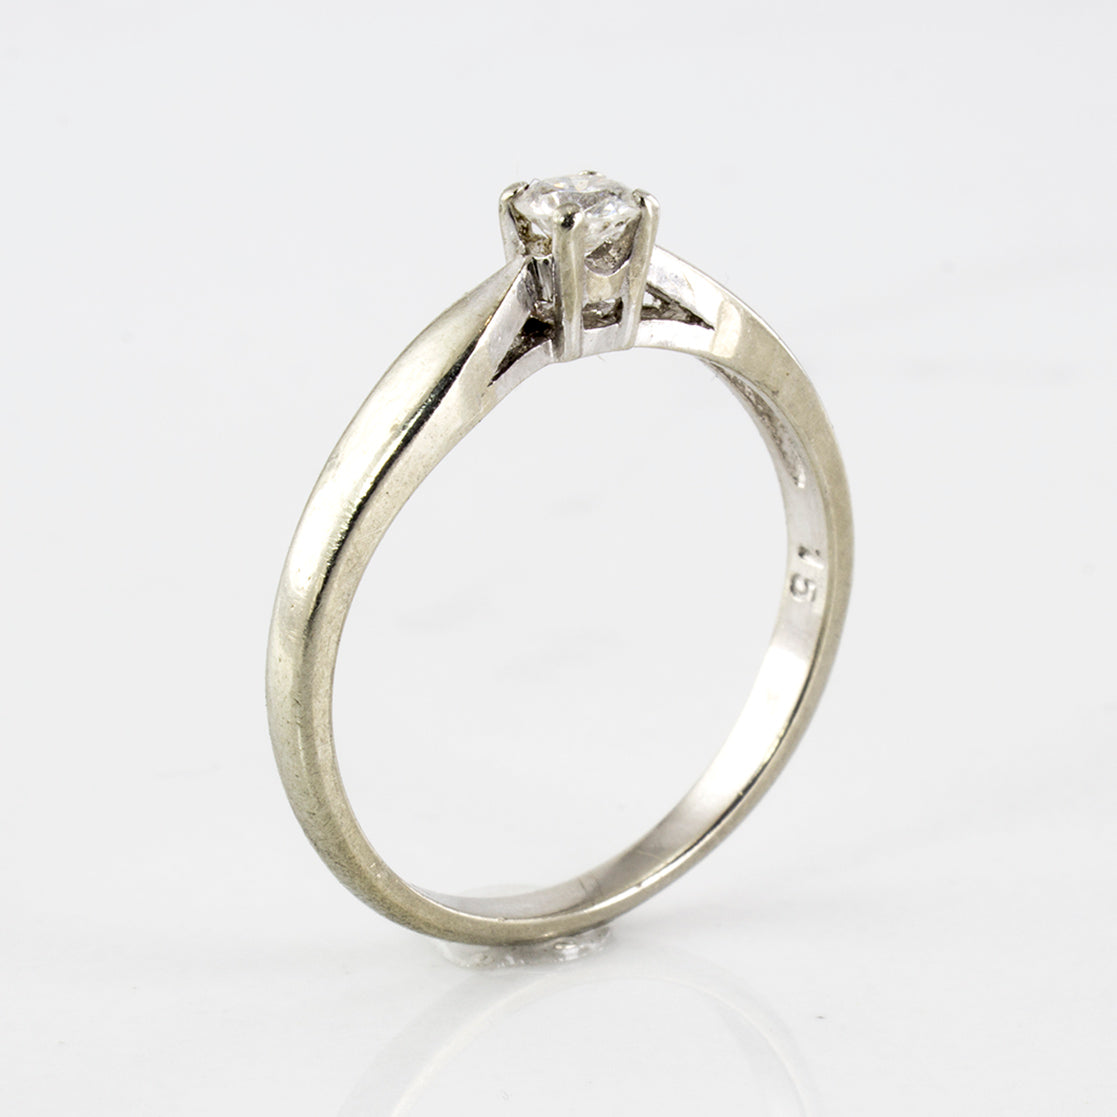 Tapered Diamond Solitaire Ring | 0.16 ctw | SZ 6.5 |